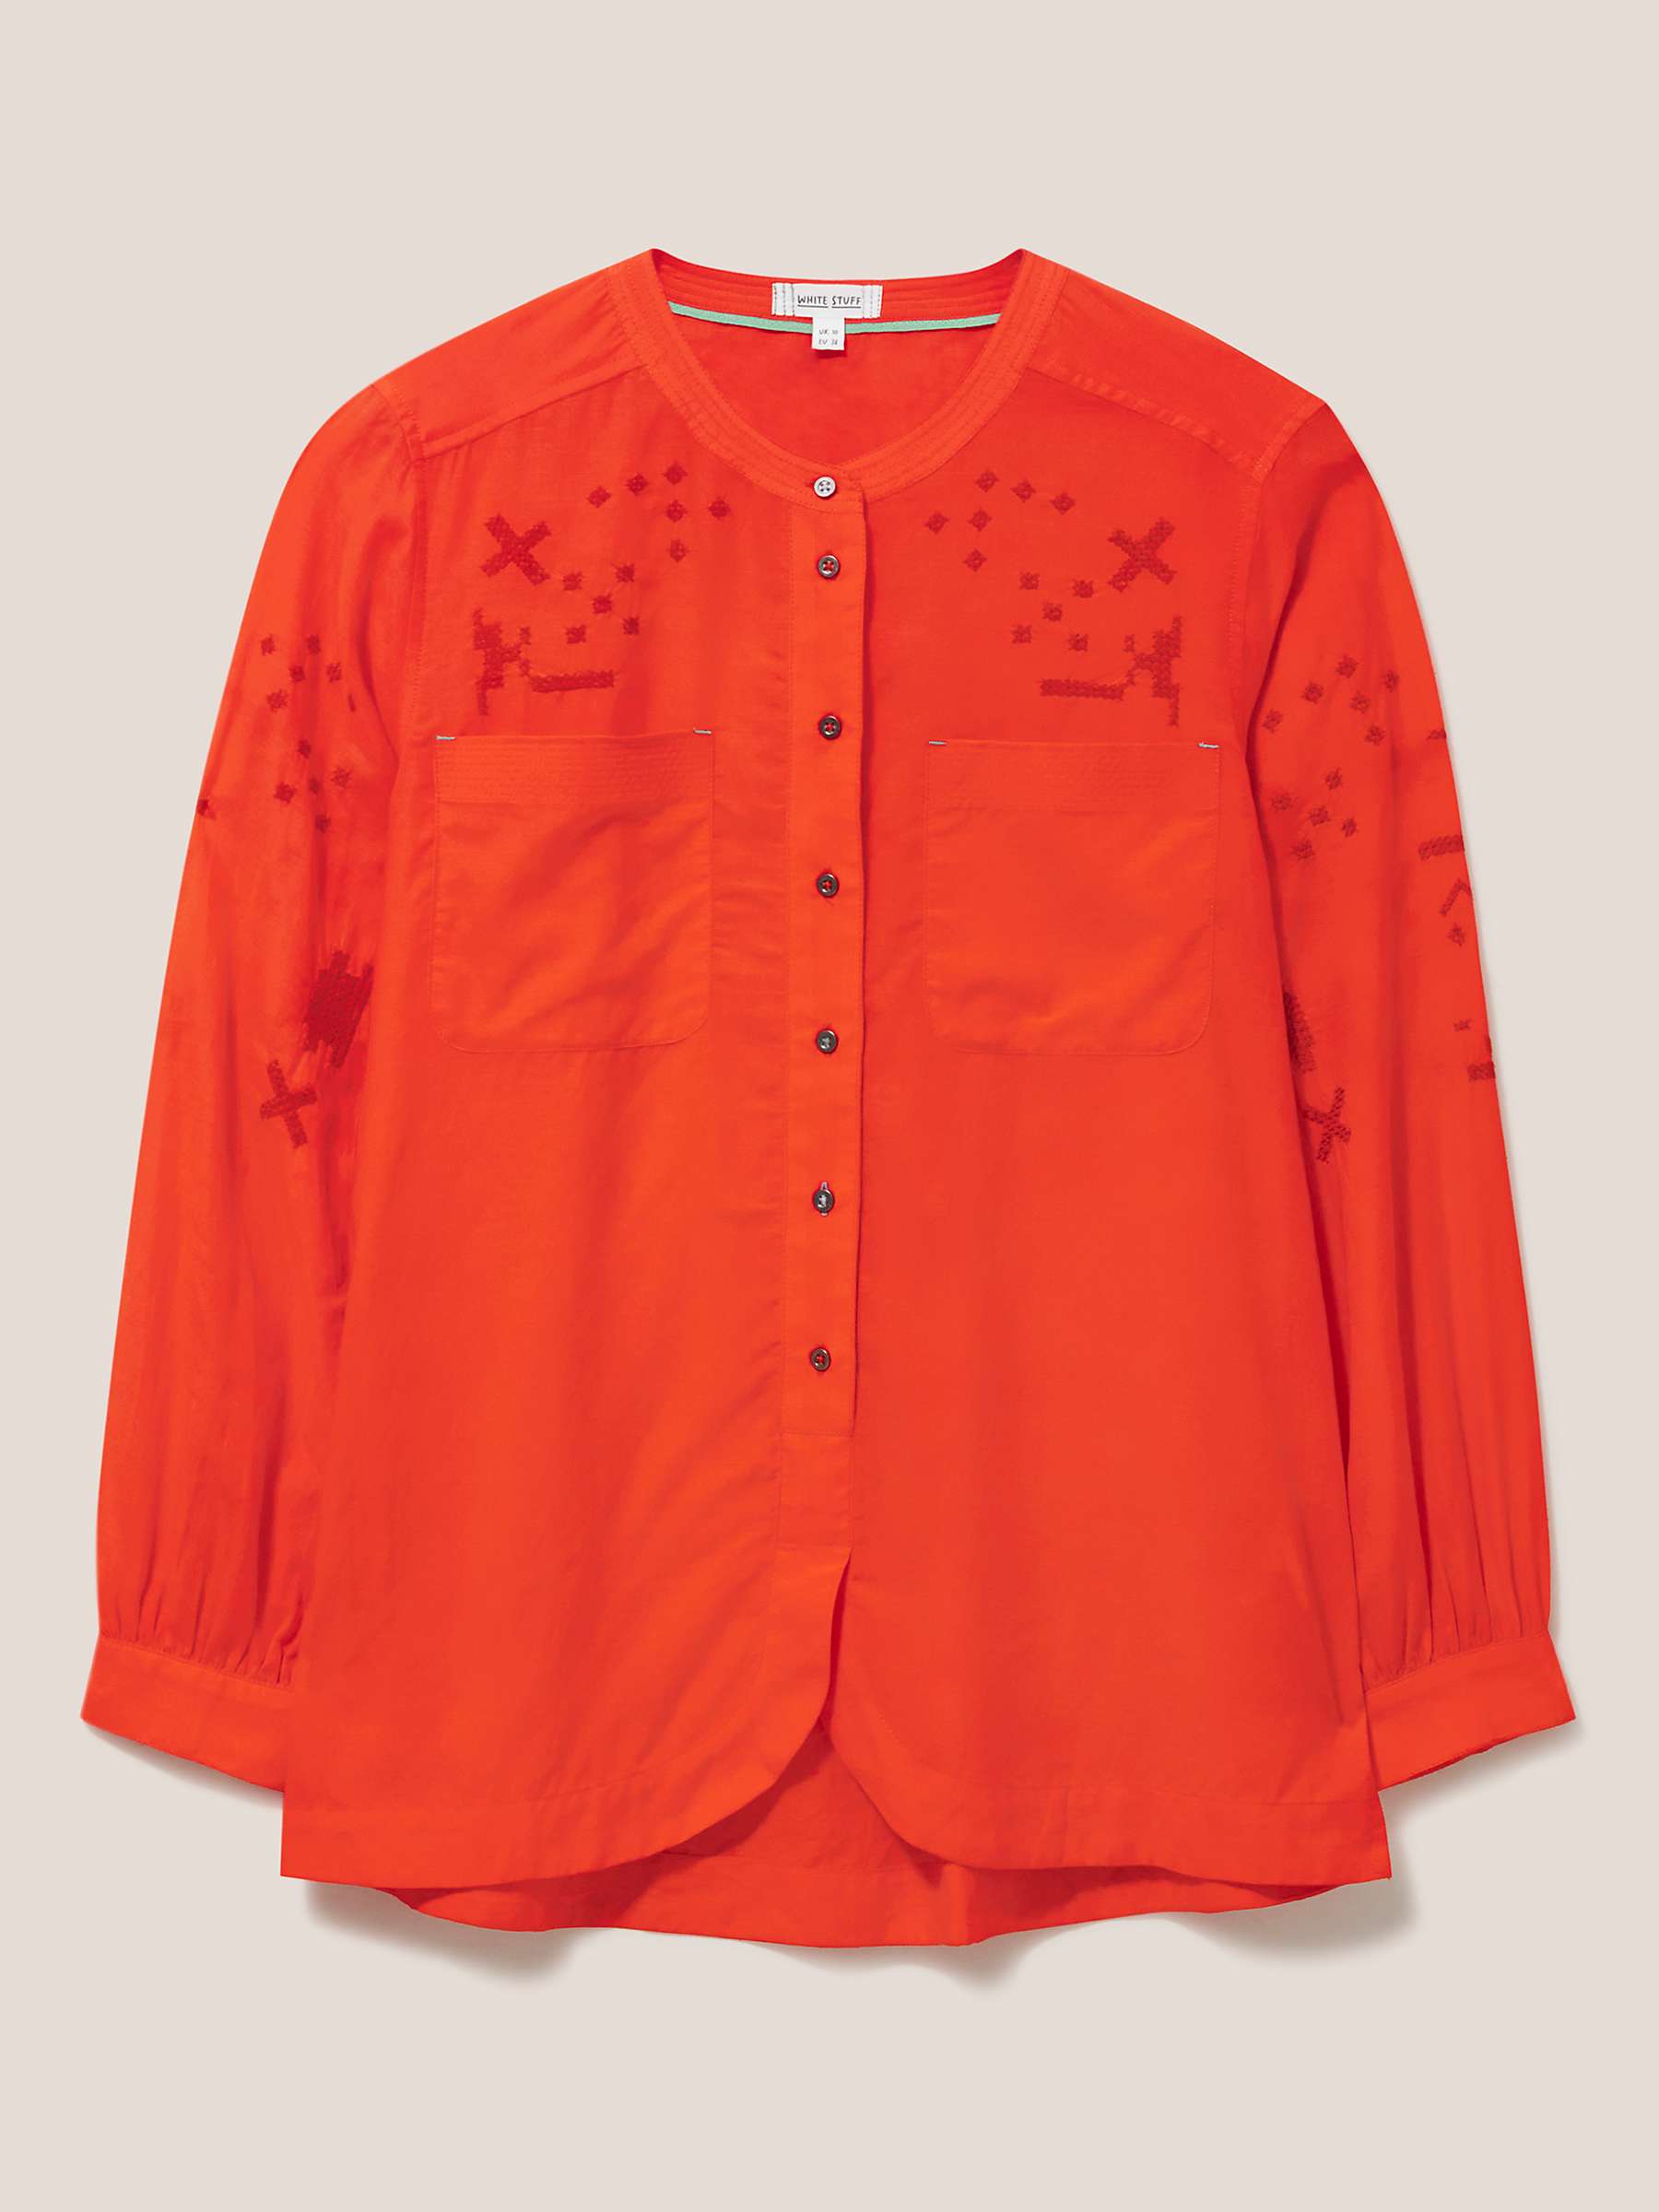 Buy White Stuff Marta Embroidered Cotton Blend Shirt, Red Online at johnlewis.com